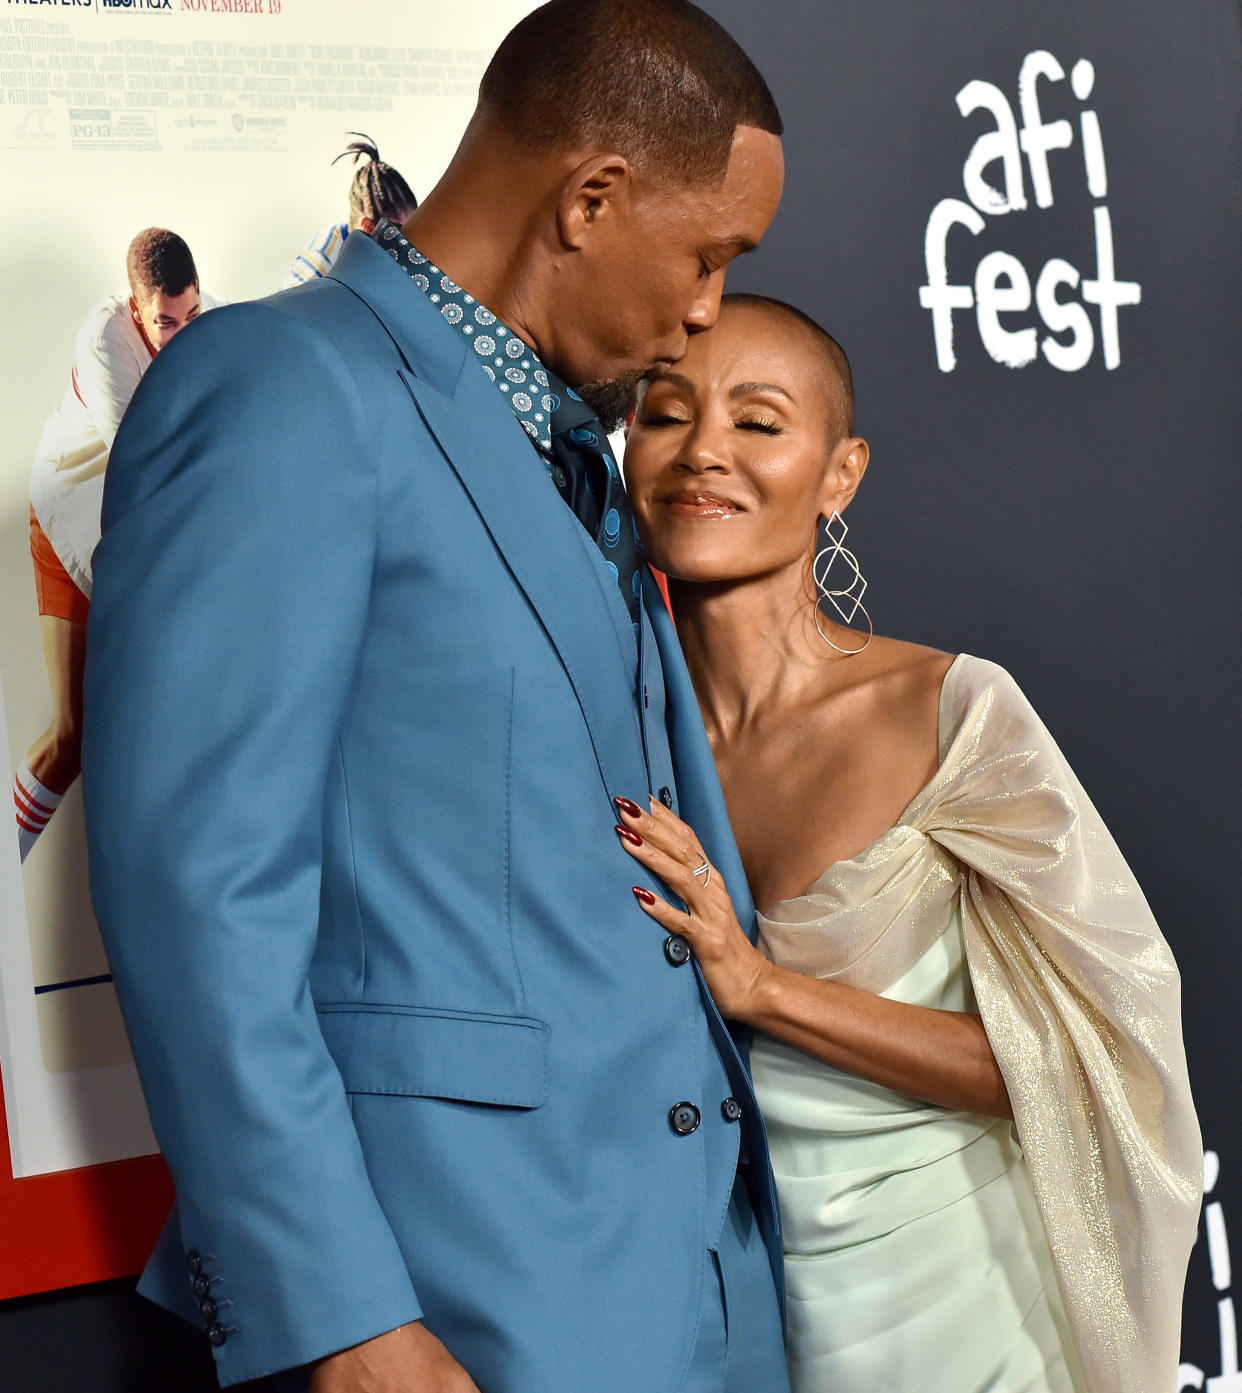 HOLLYWOOD, CALIFORNIA - NOVEMBER 14: Will Smith and Jada Pinkett Smith attend the 2021 AFI Fest - Closing Night Premiere of Warner Bros. 